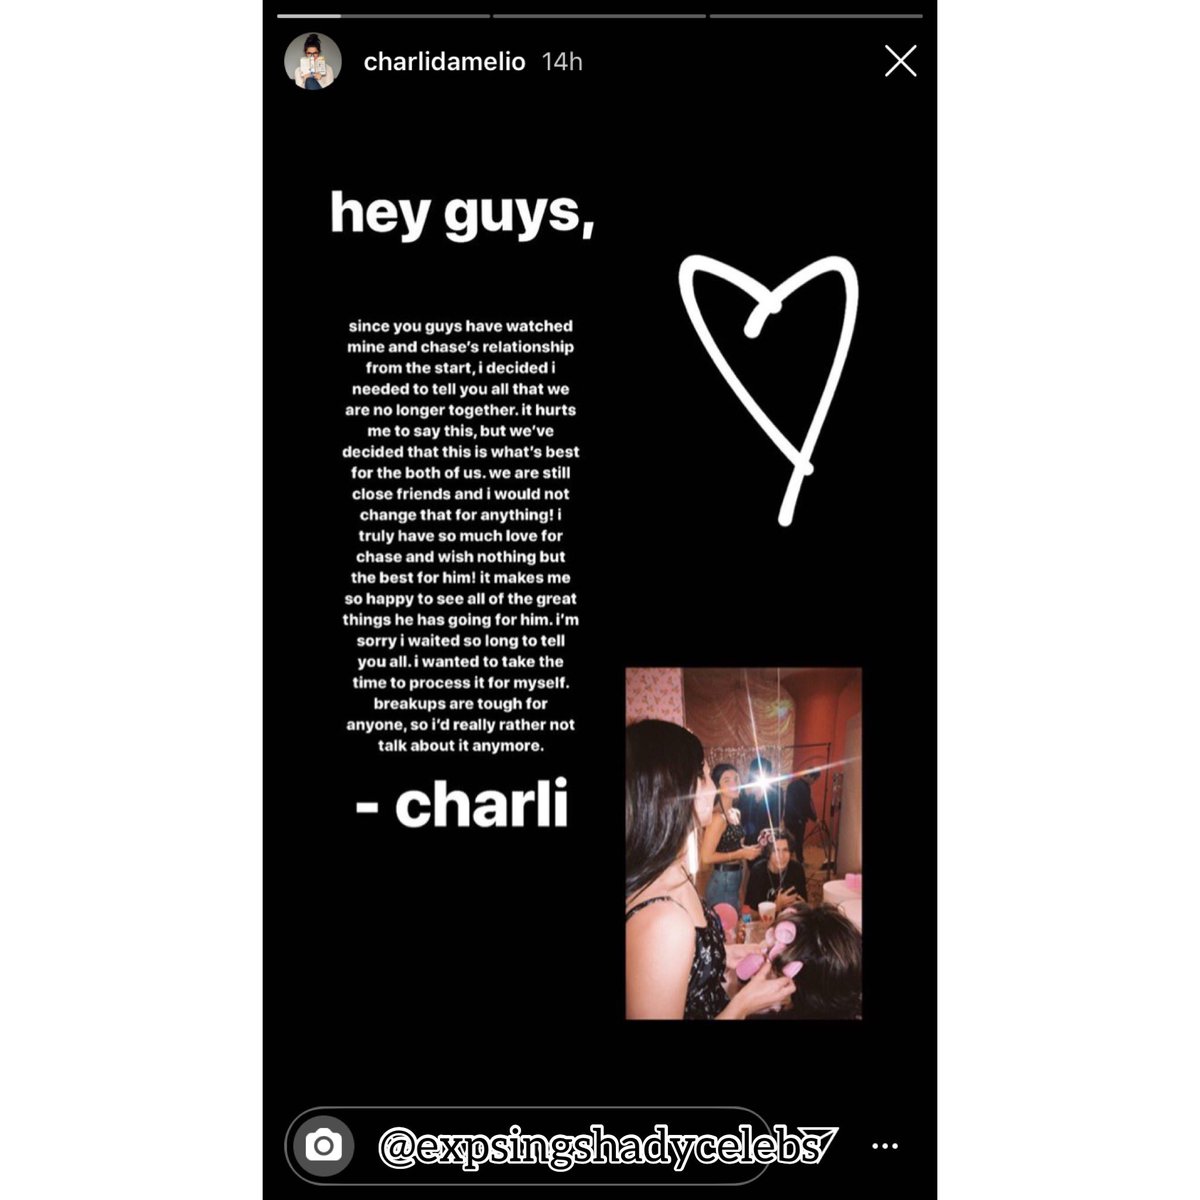 Charli D’amelio and Chase Hudson (Lil Huddy) both took to their Instagram stories to announce their breakup